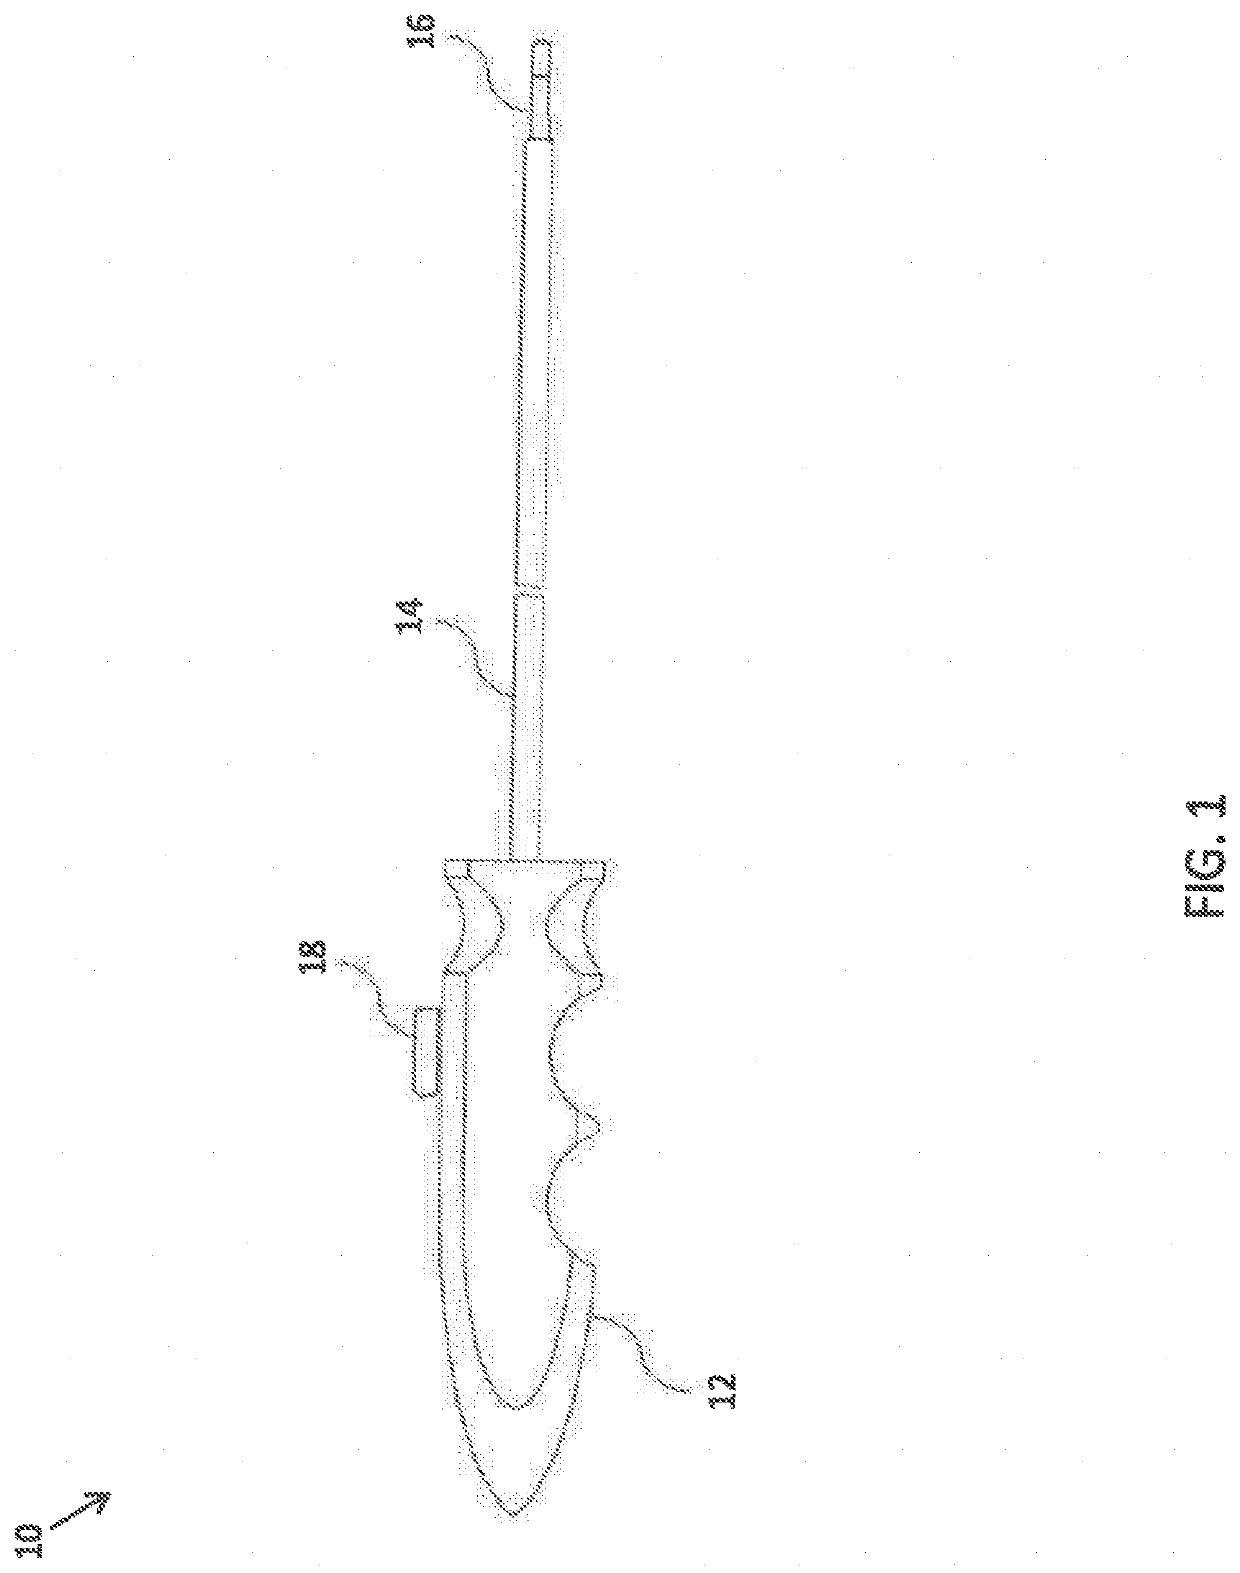 Soft tissue cutting instrument with self locking, multi-position, and slide button linearly actuated retractable blade or hook